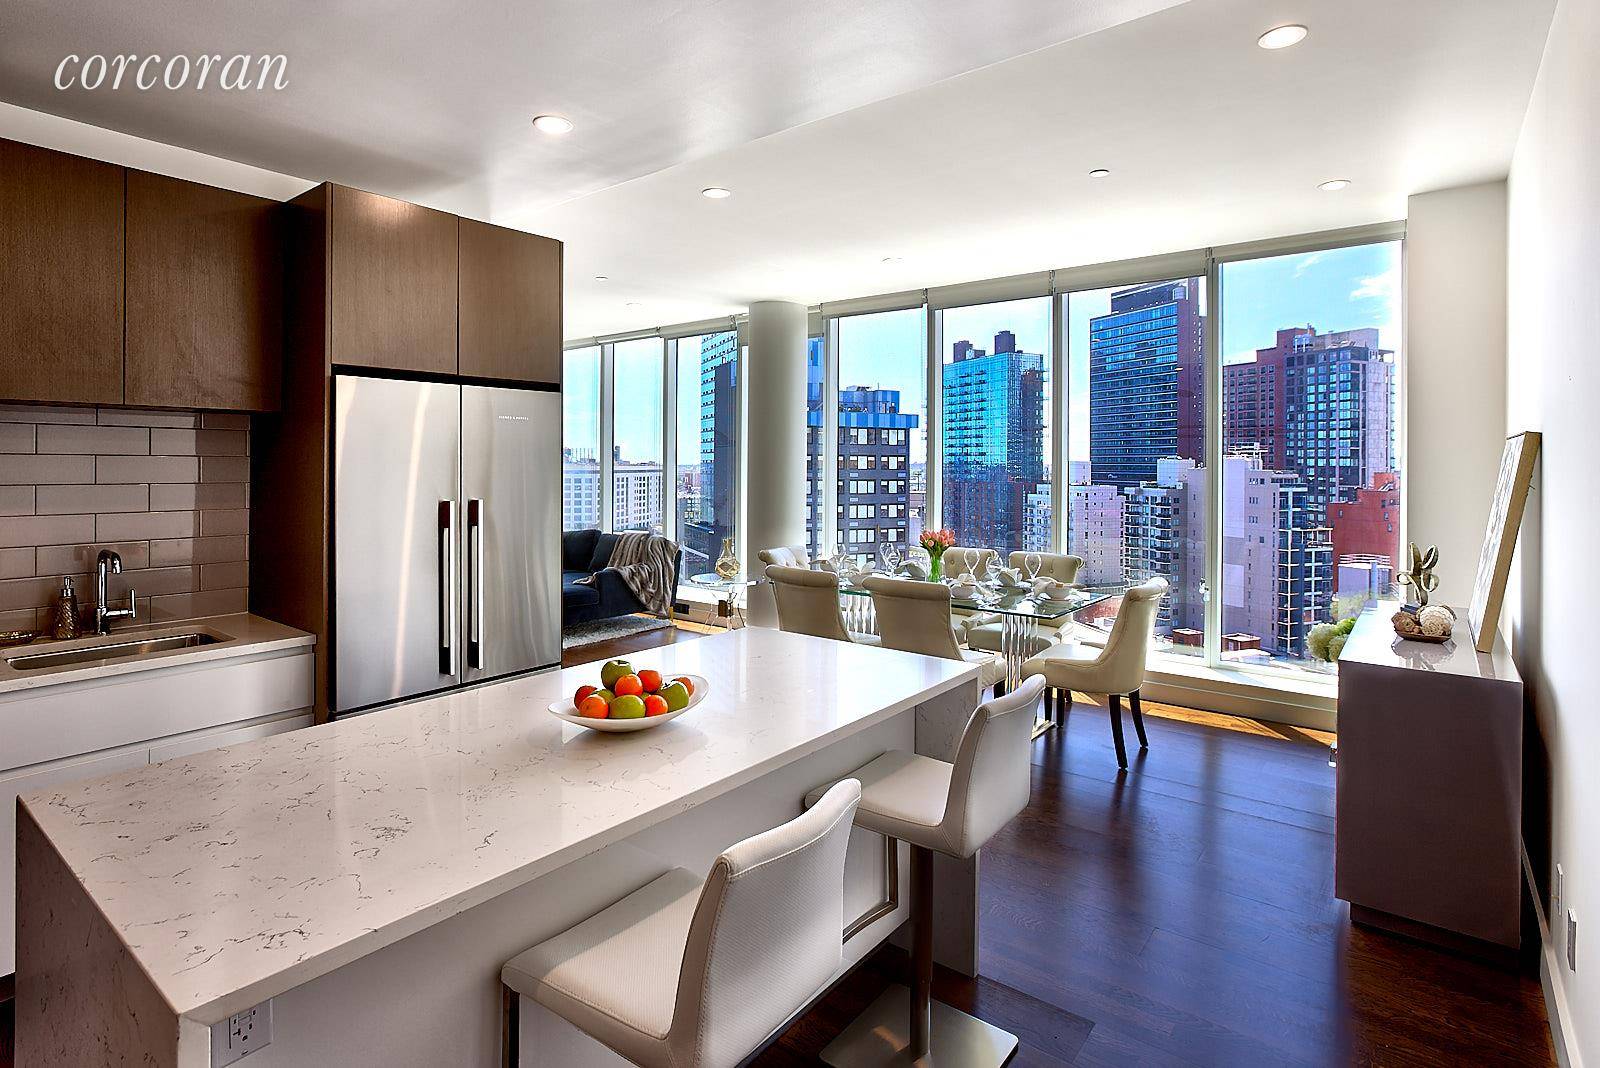 SPACIOUS 2 BED 2 BATH WITH A 15 YEAR TAX ABATEMENT Set in the heart of vibrant Long Island City, Star Tower combines sleek modern design, thoughtful space, and graceful ...